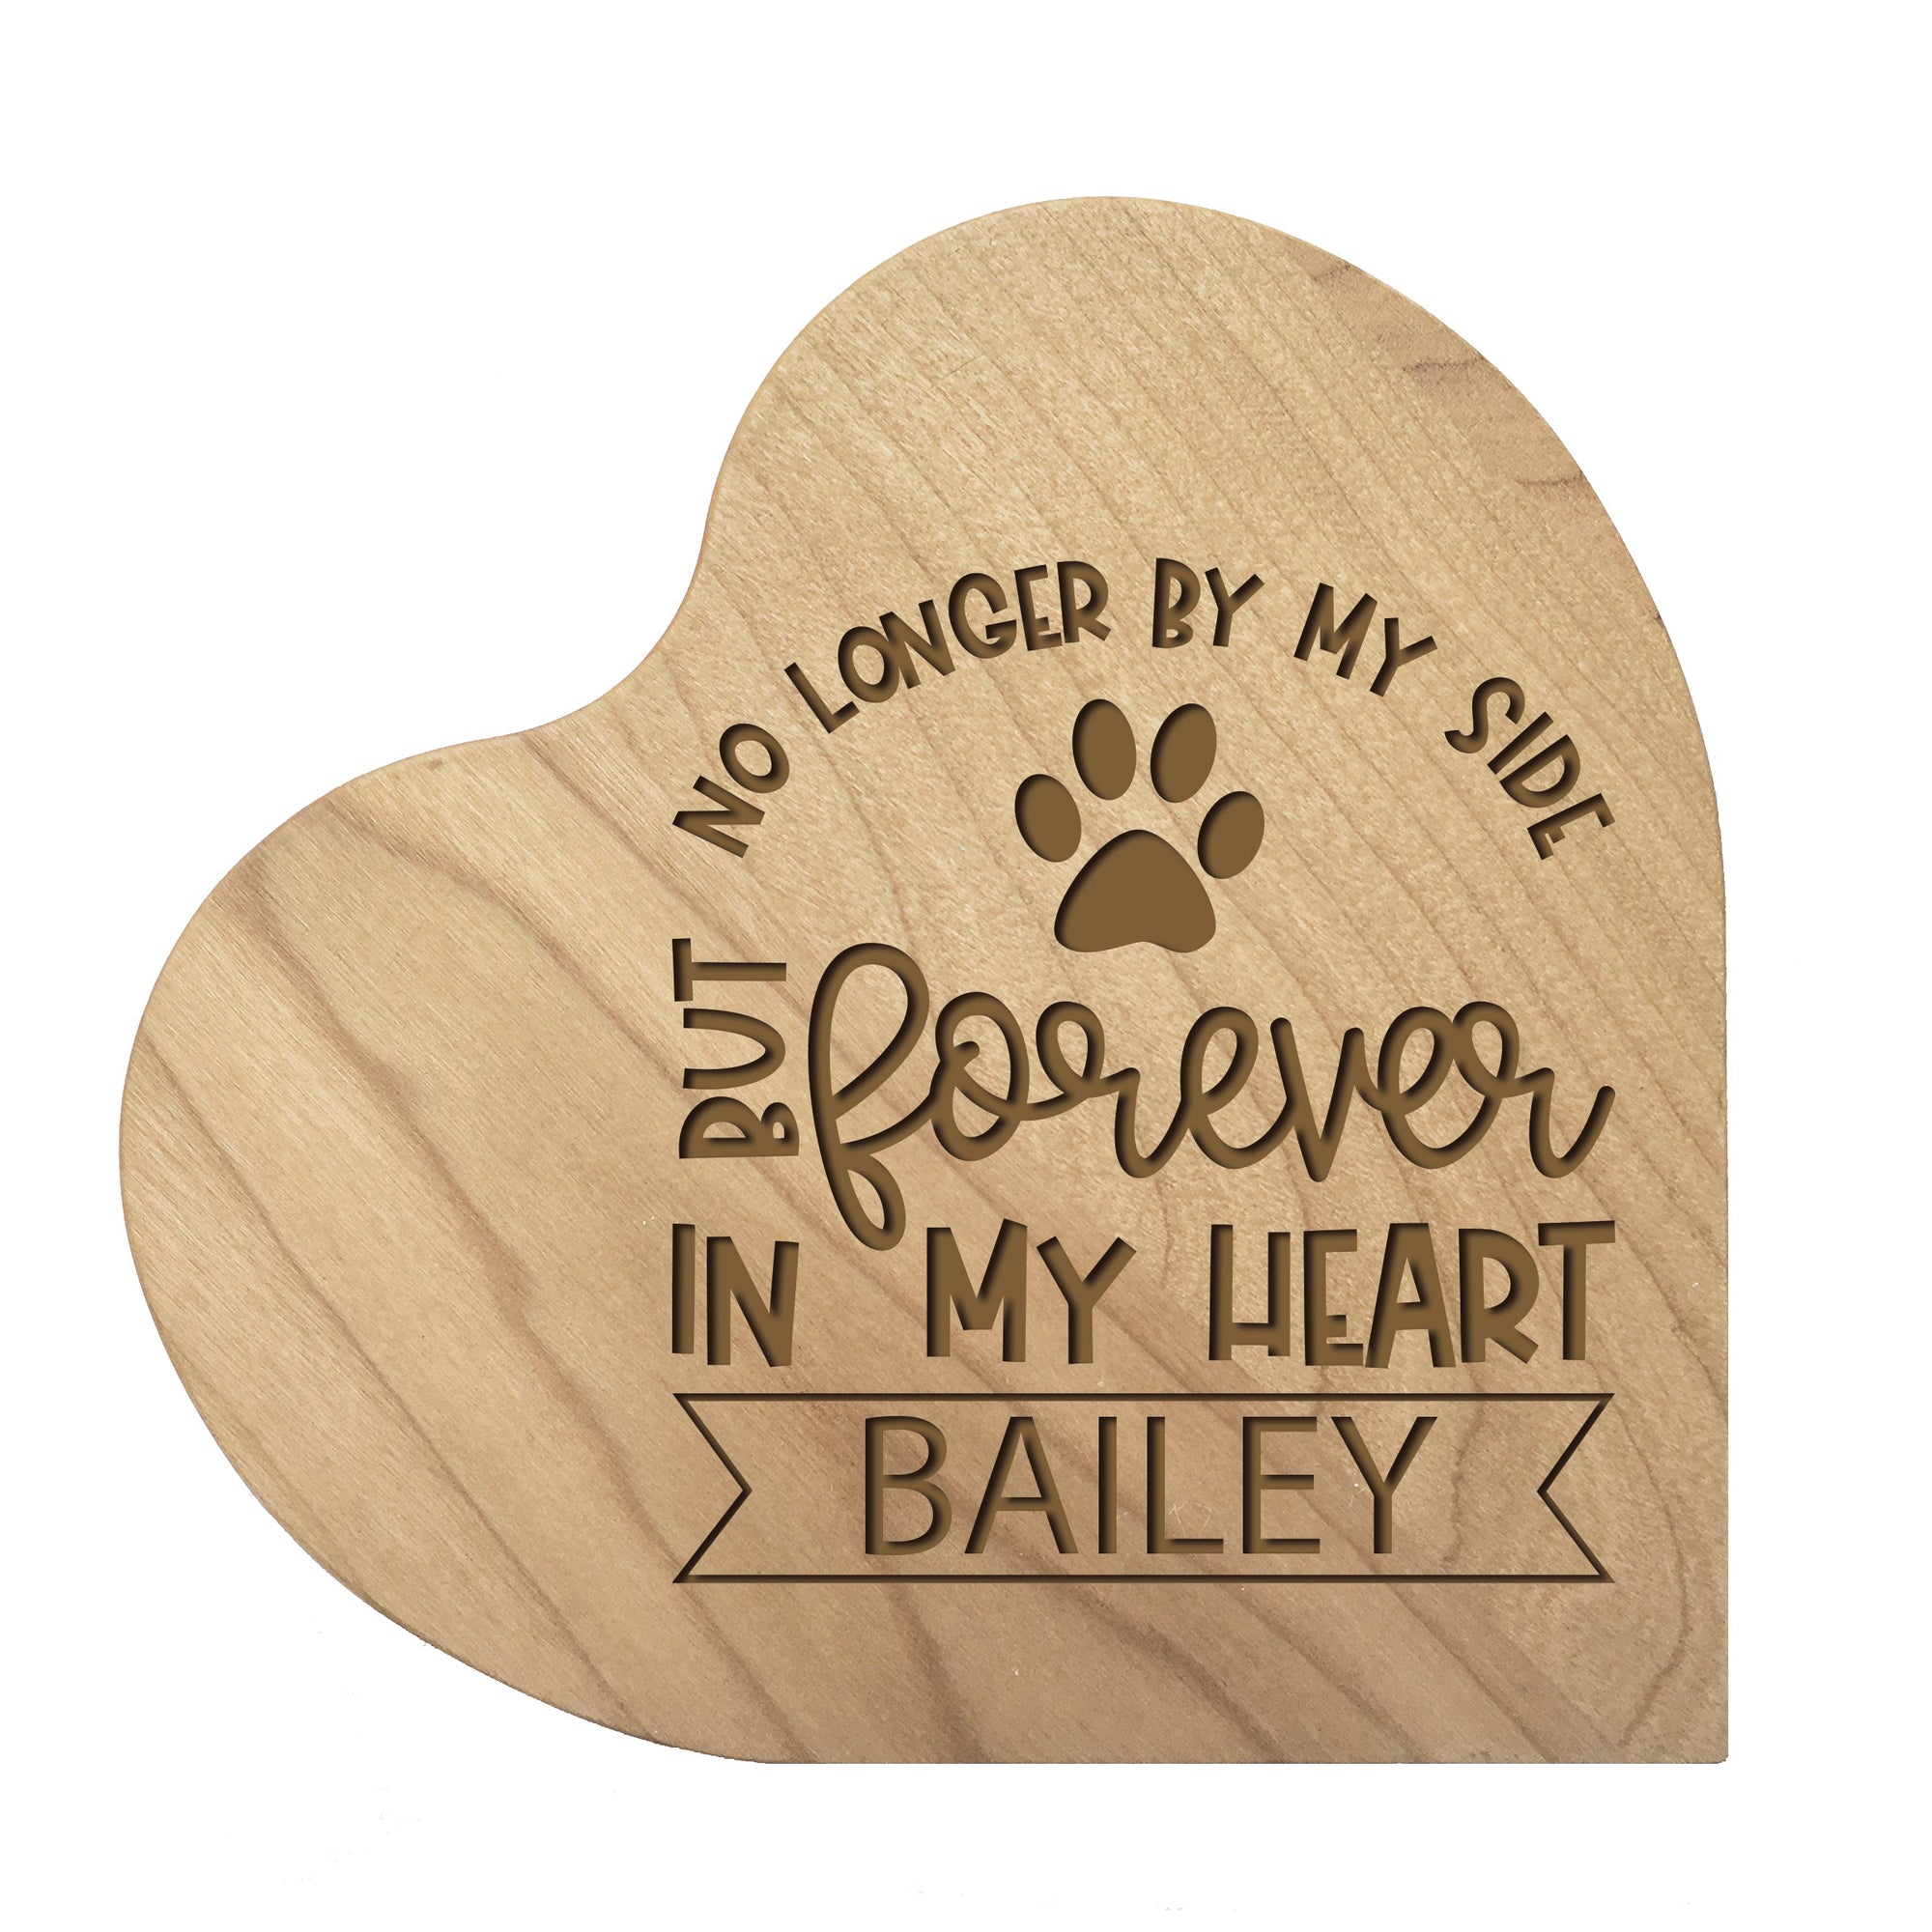 Maple Pet Memorial Heart Block Decor with phrase "No Longer By My Side"